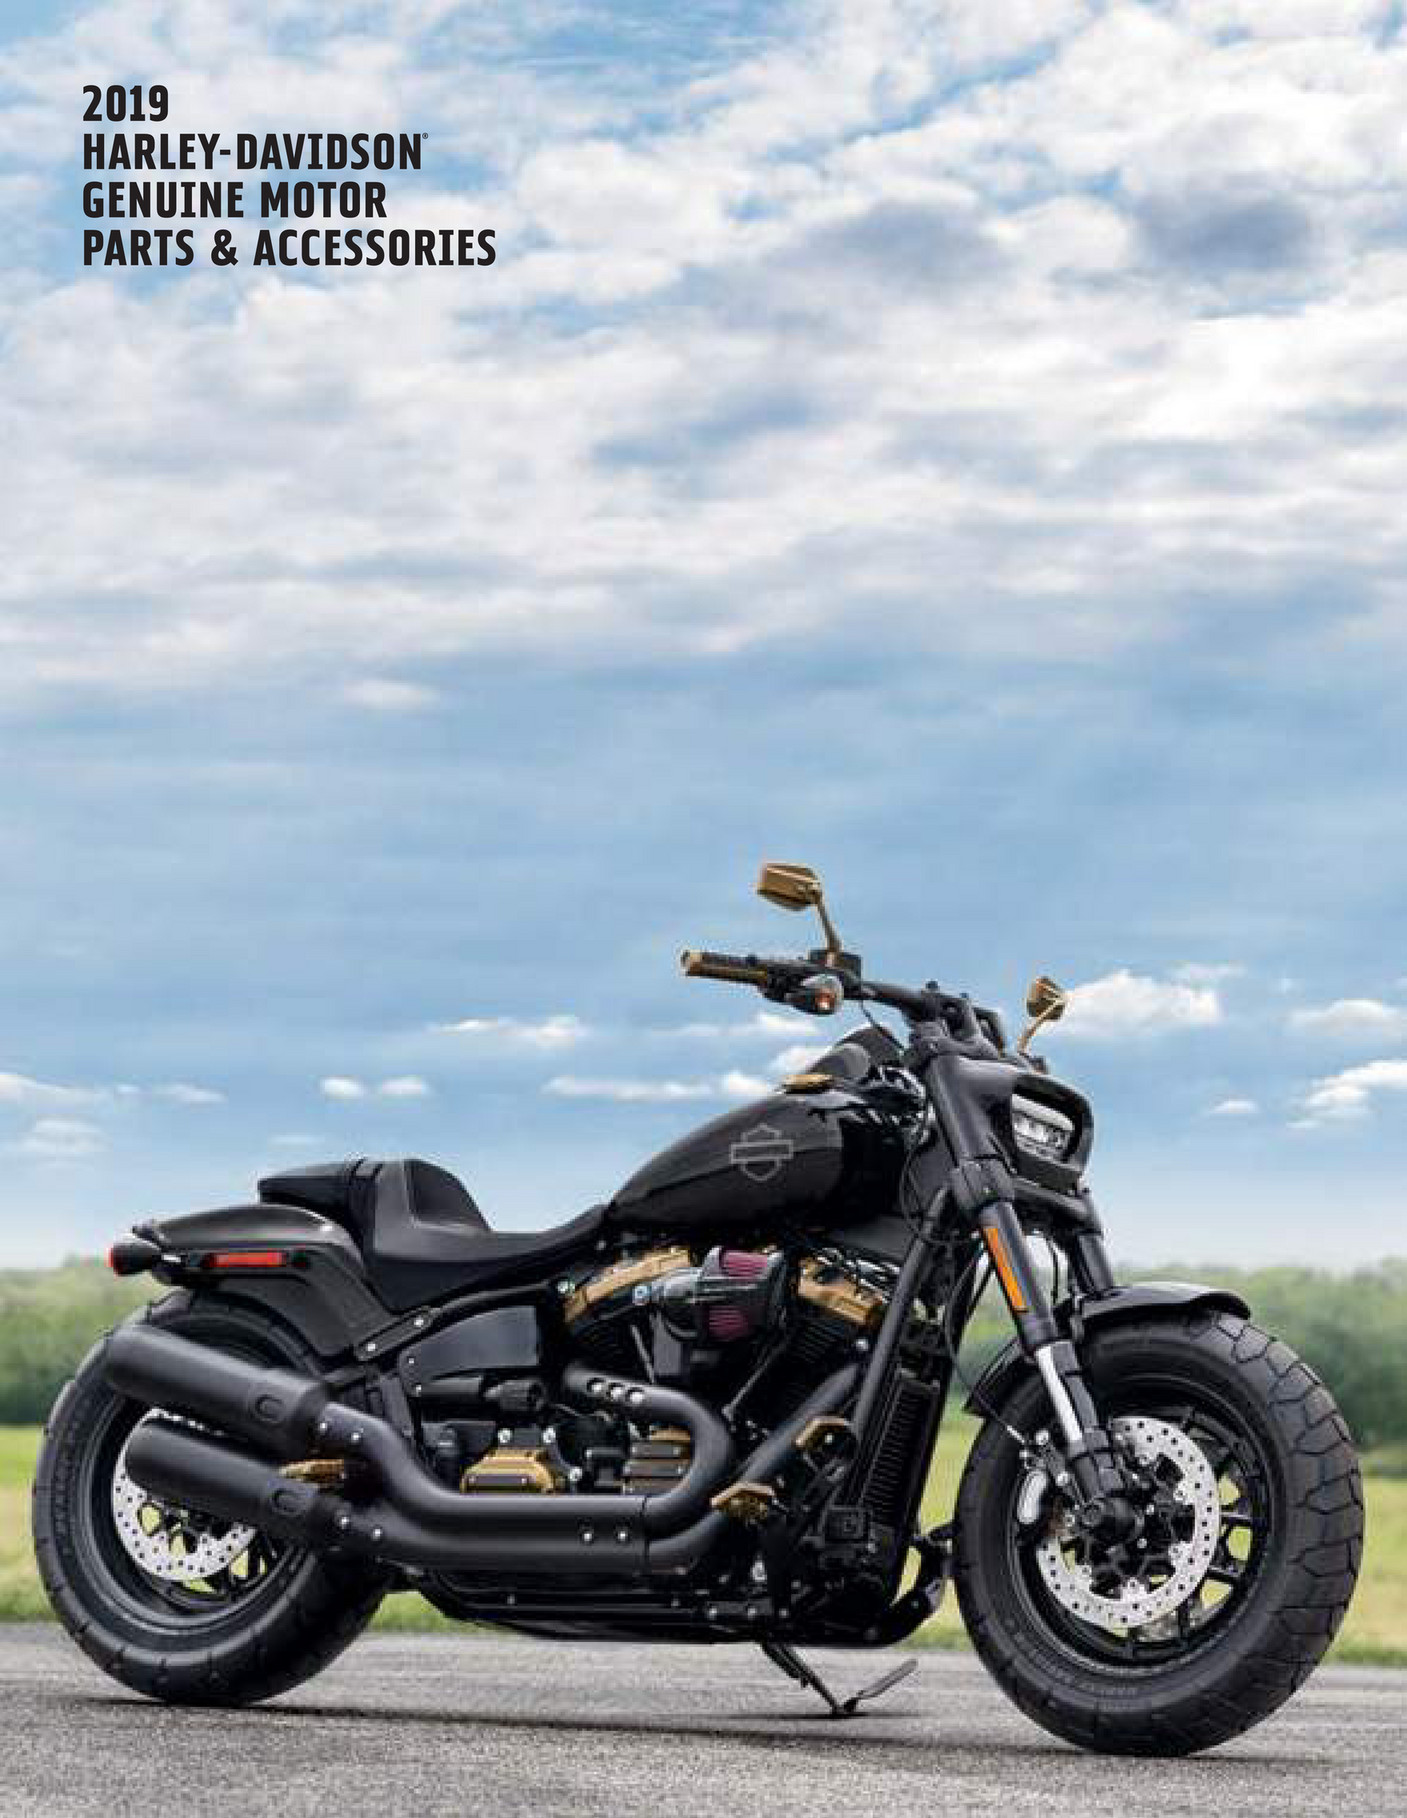 2017 Harley Davidson Softail Deluxe Service Manual